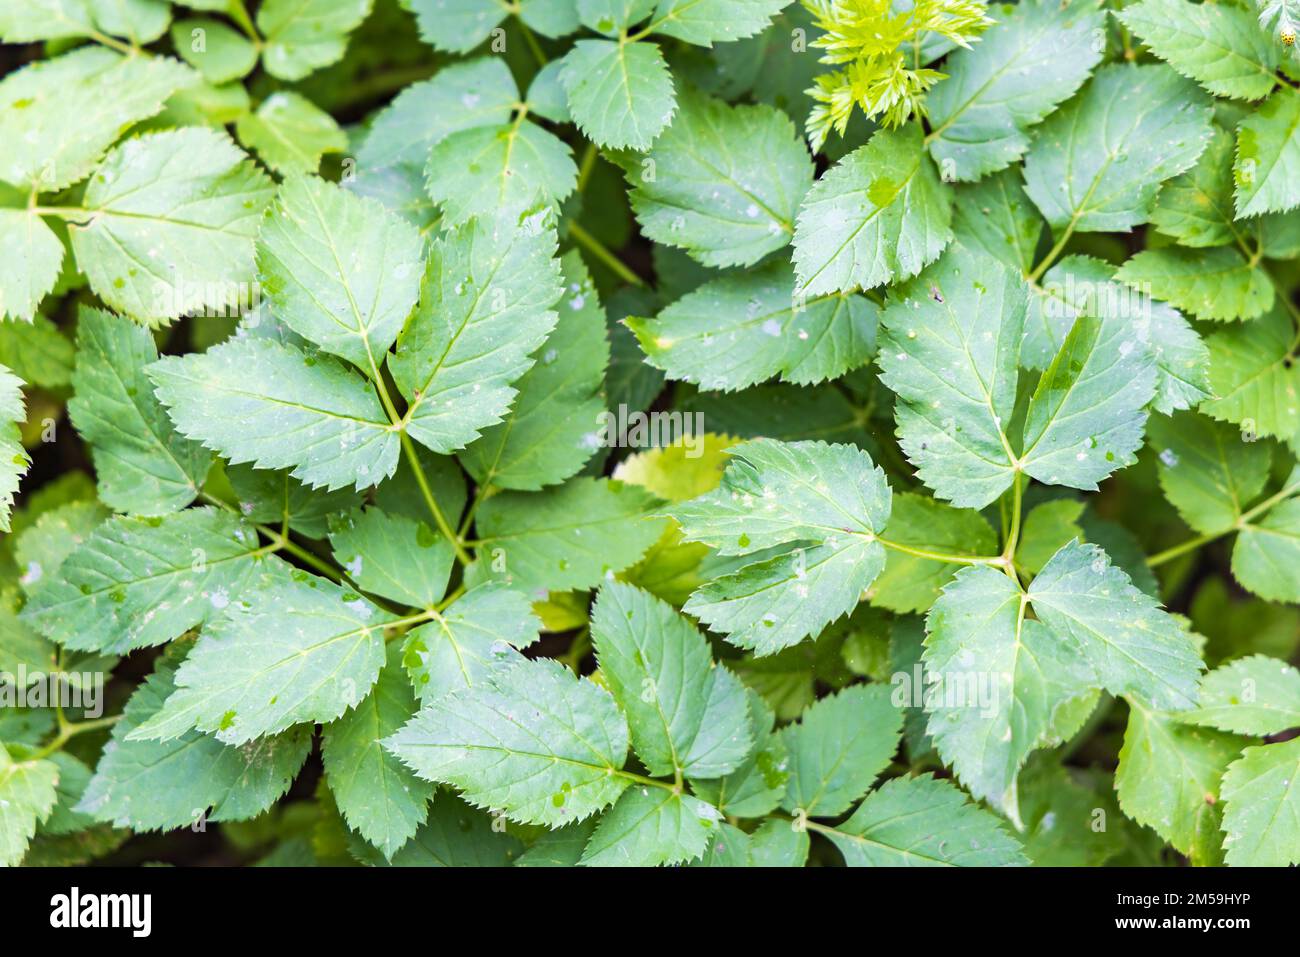 Aegopodium podagraria or gorund elder weed plant whioch can be used to make pesto Stock Photo